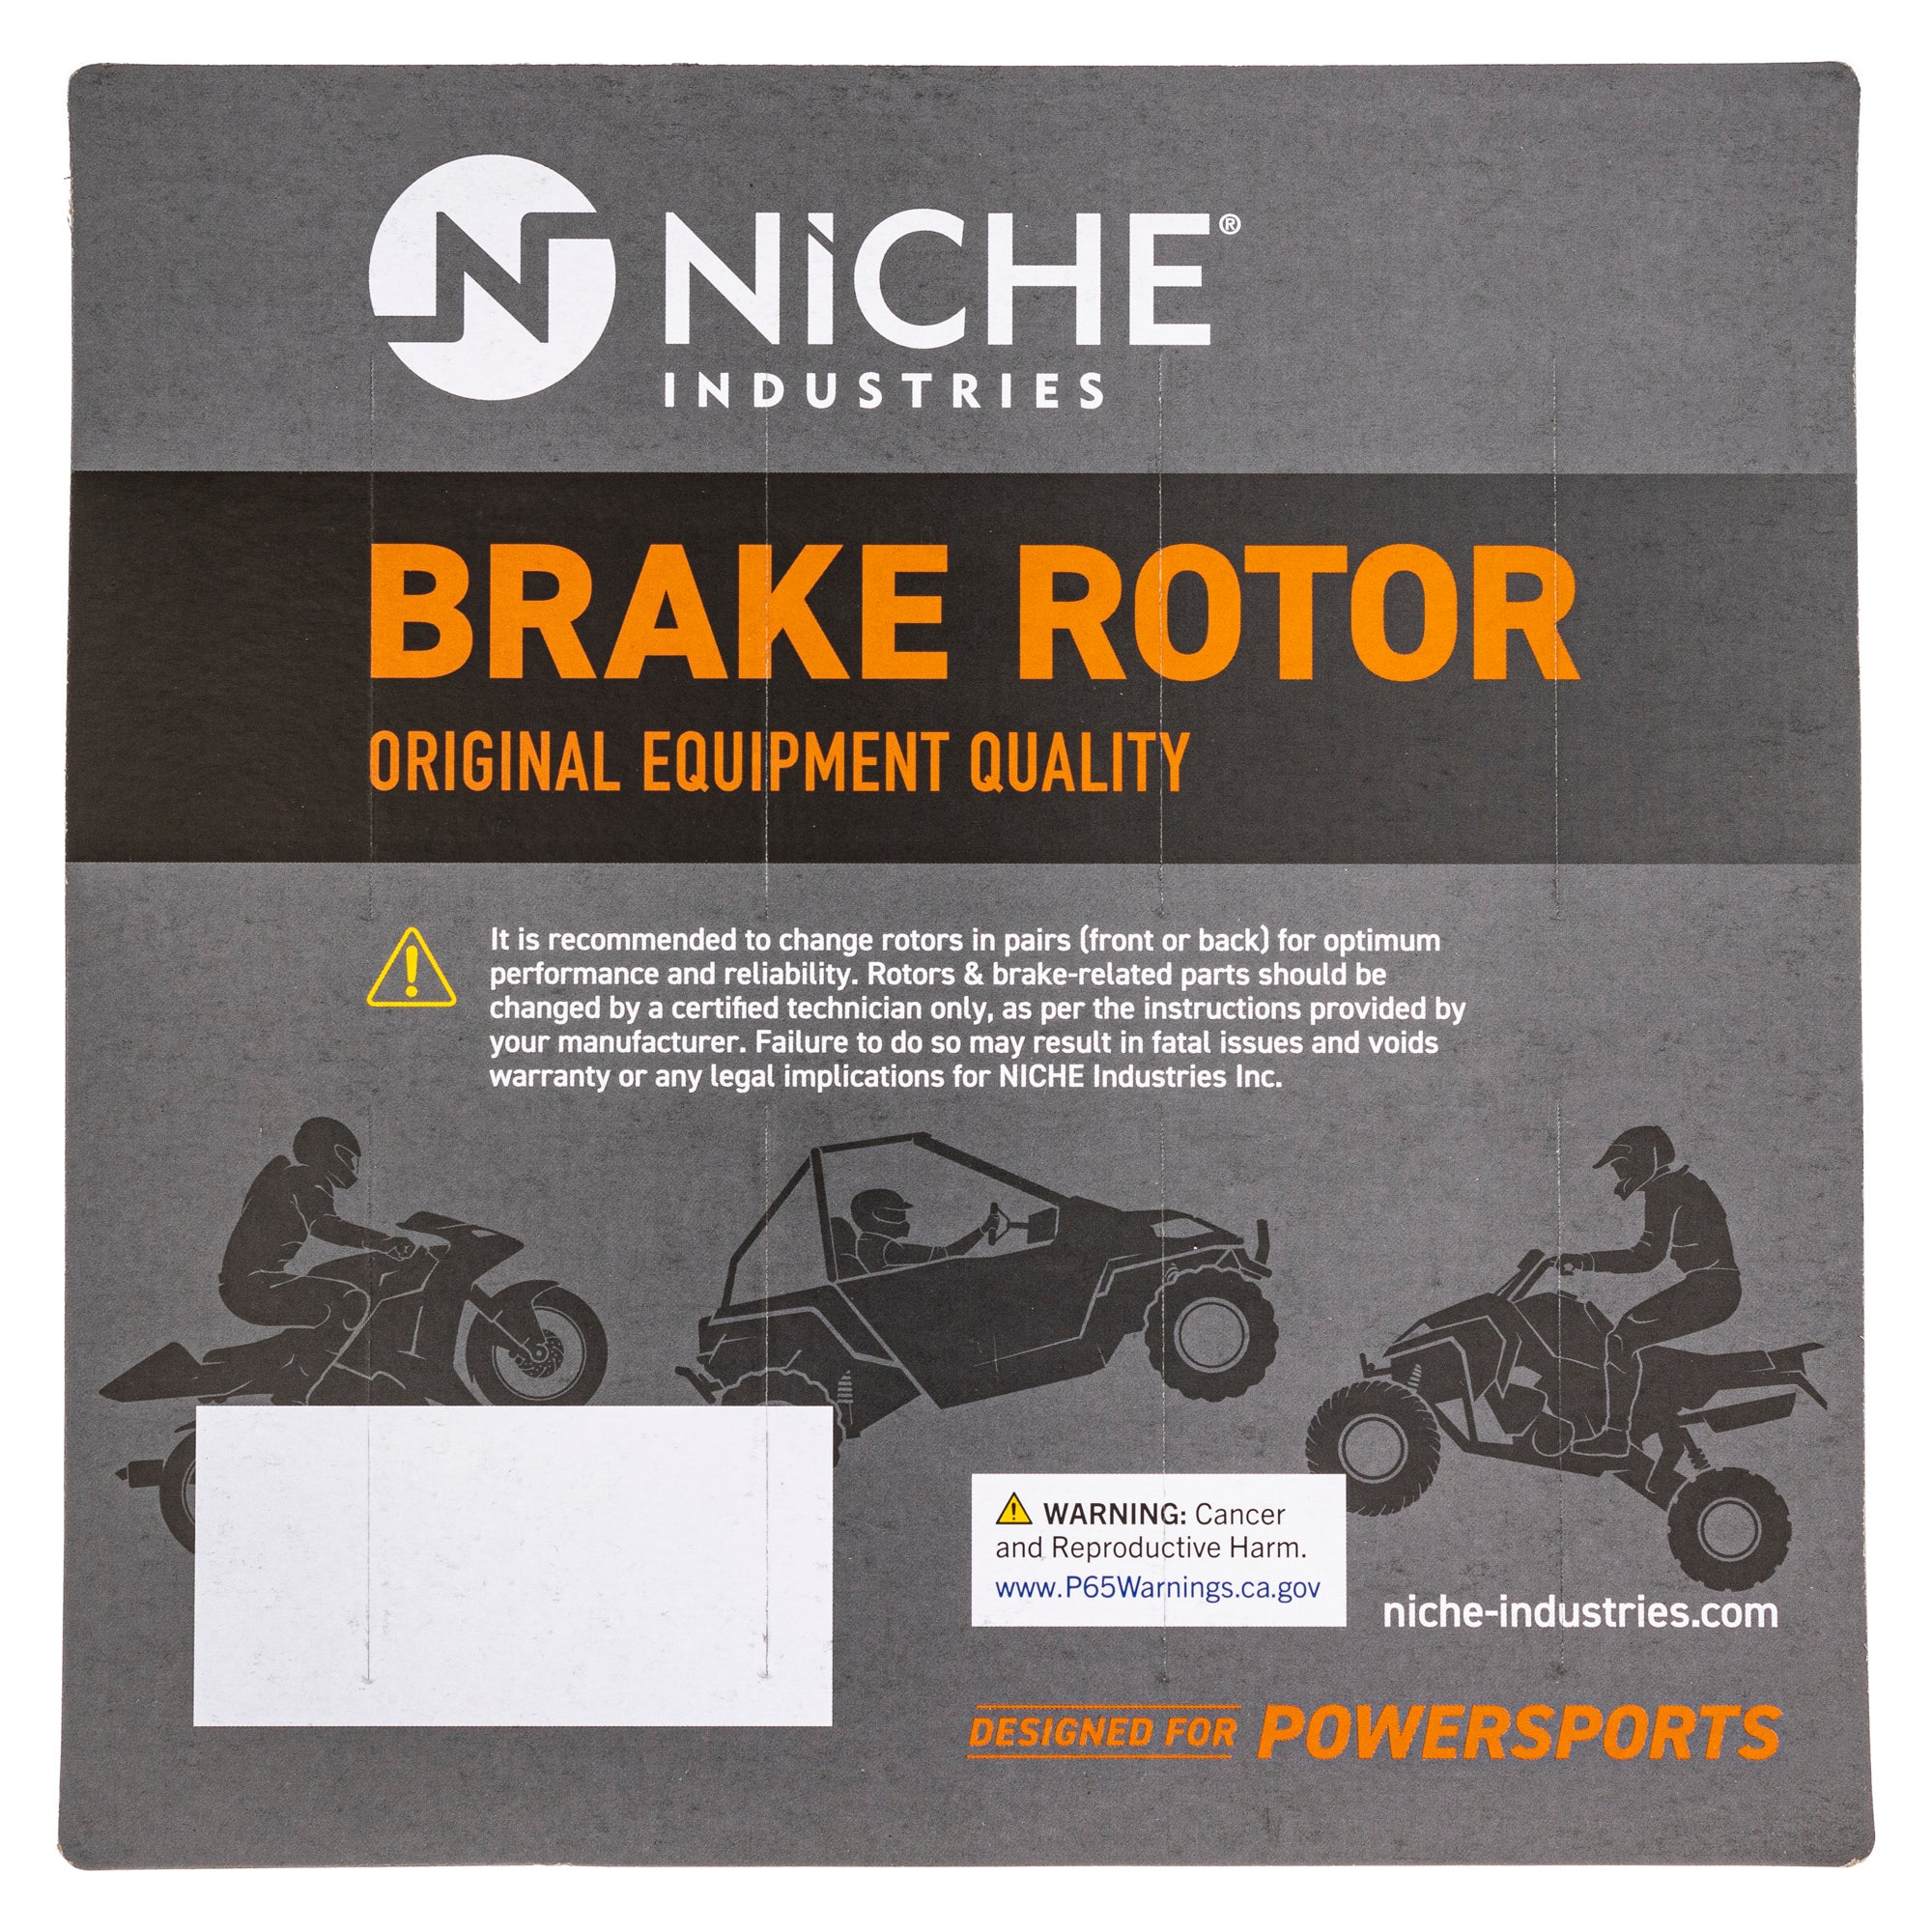 NICHE 519-CRT2498R Brake Rotor 4-Pack for zOTHER Mule